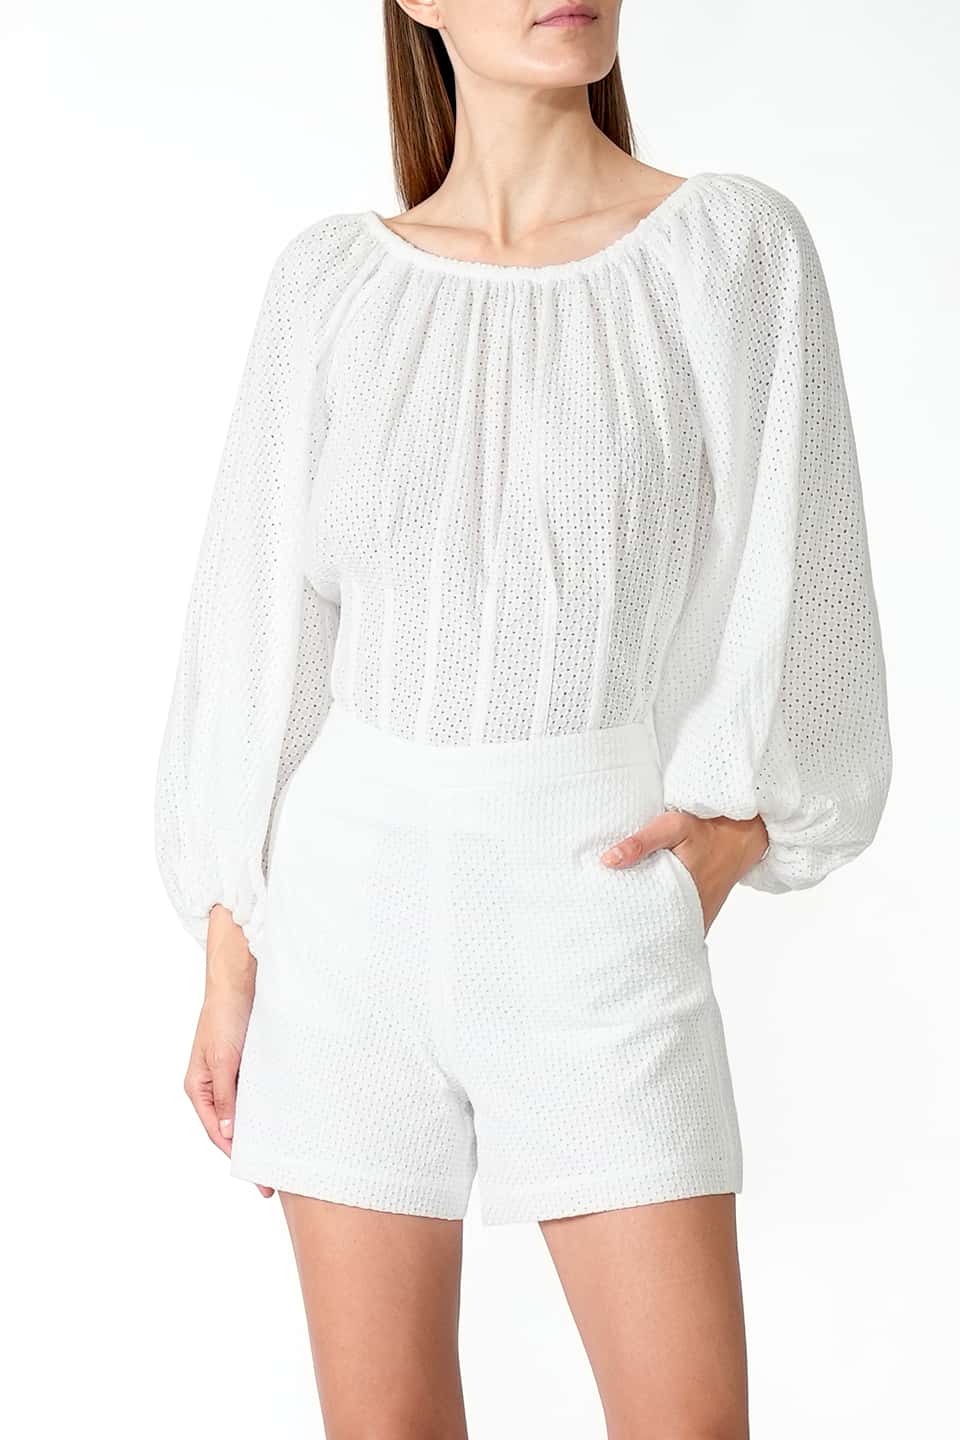 Thumbnail for Product gallery 3, High Waist Cotton Shorts White